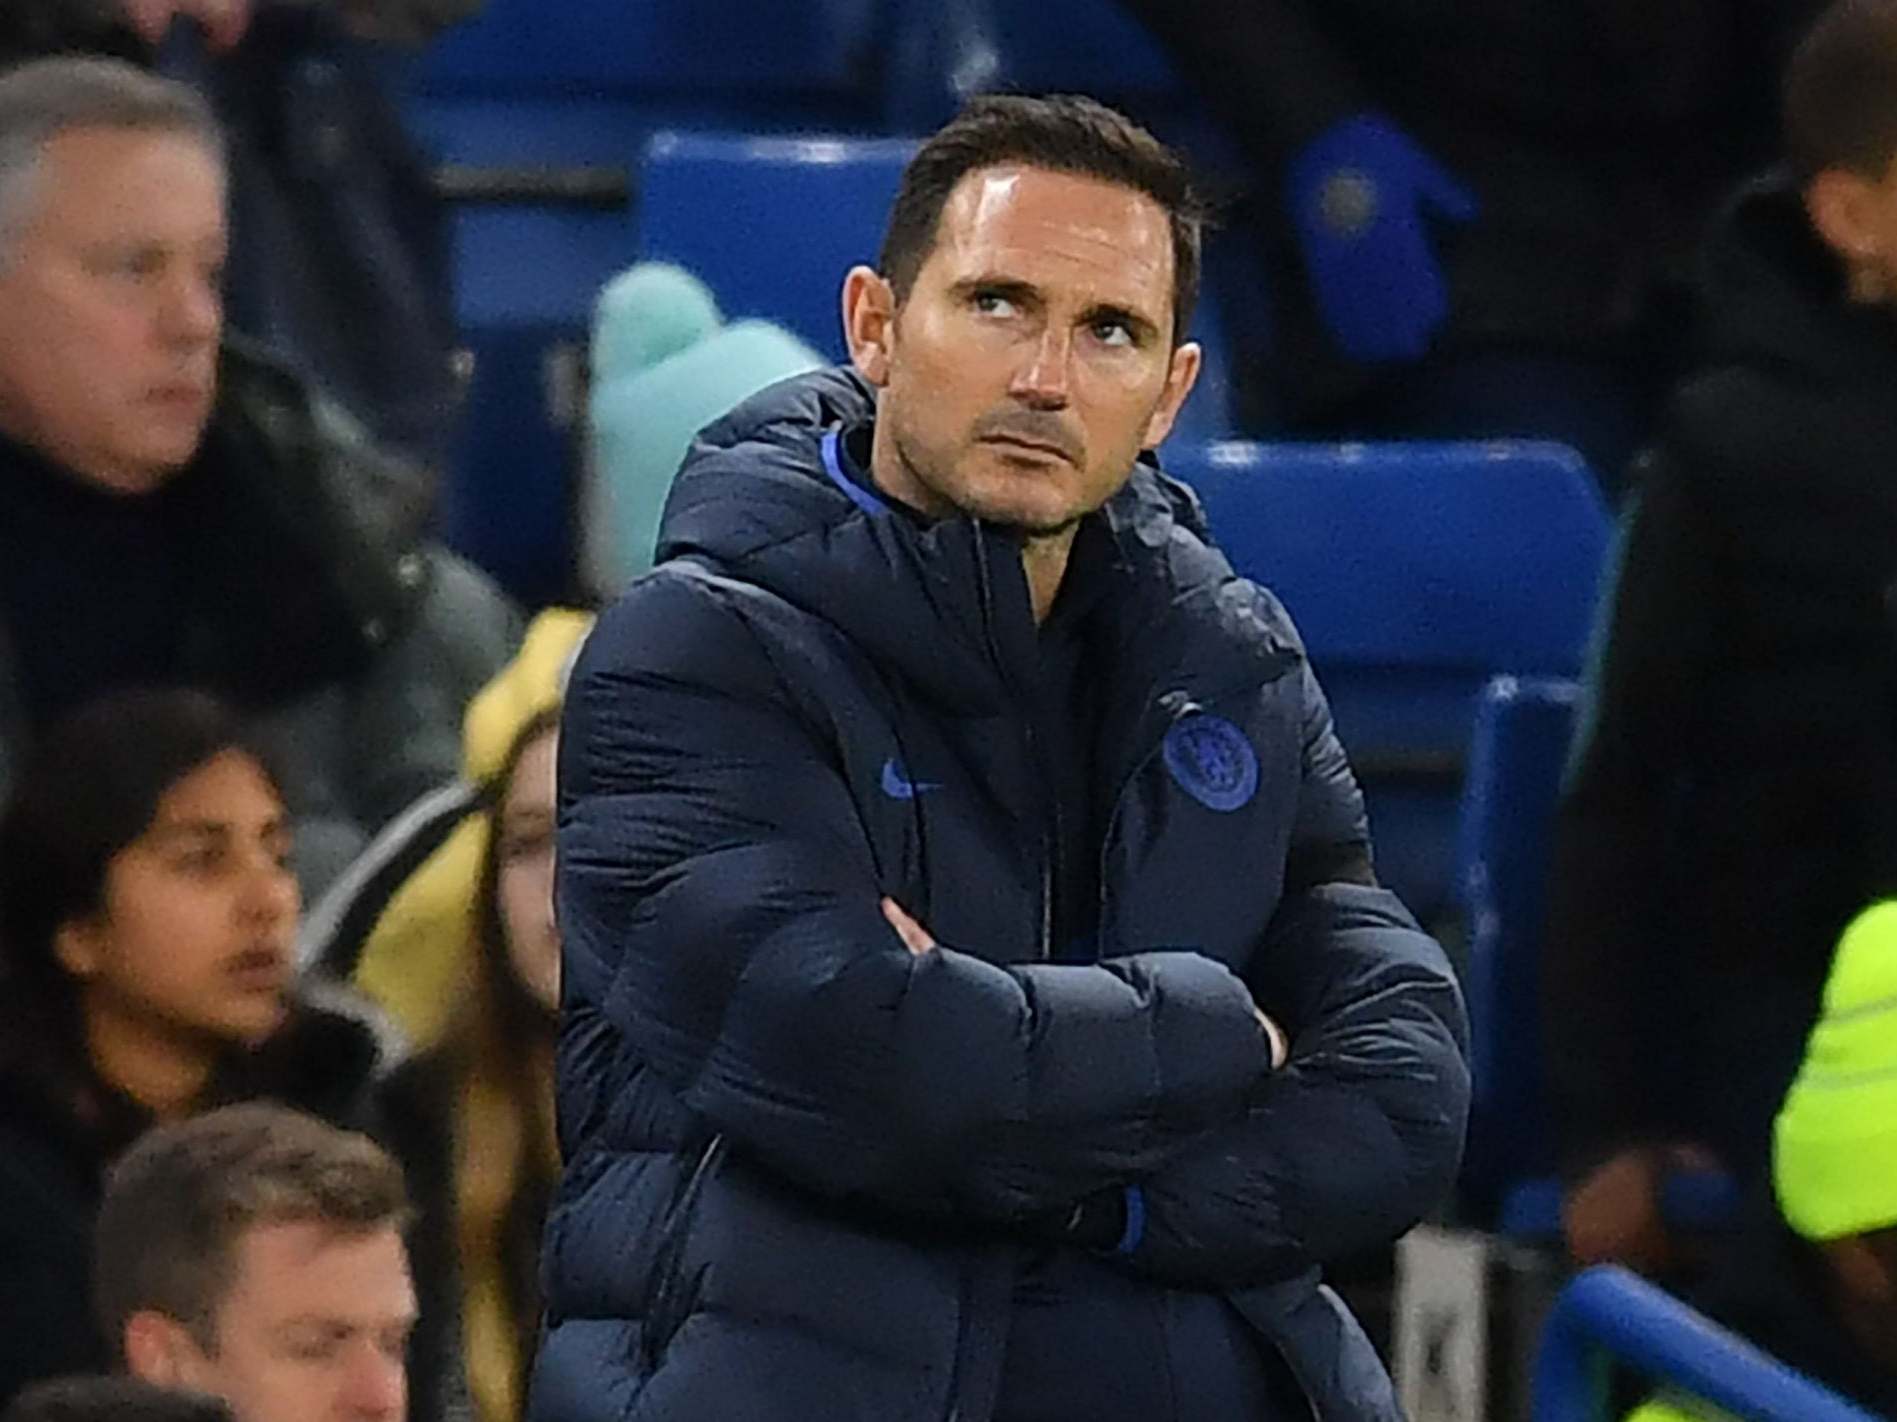 Frank Lampard left with problems to fix at Chelsea as old friend Jose Mourinho applies the pressure